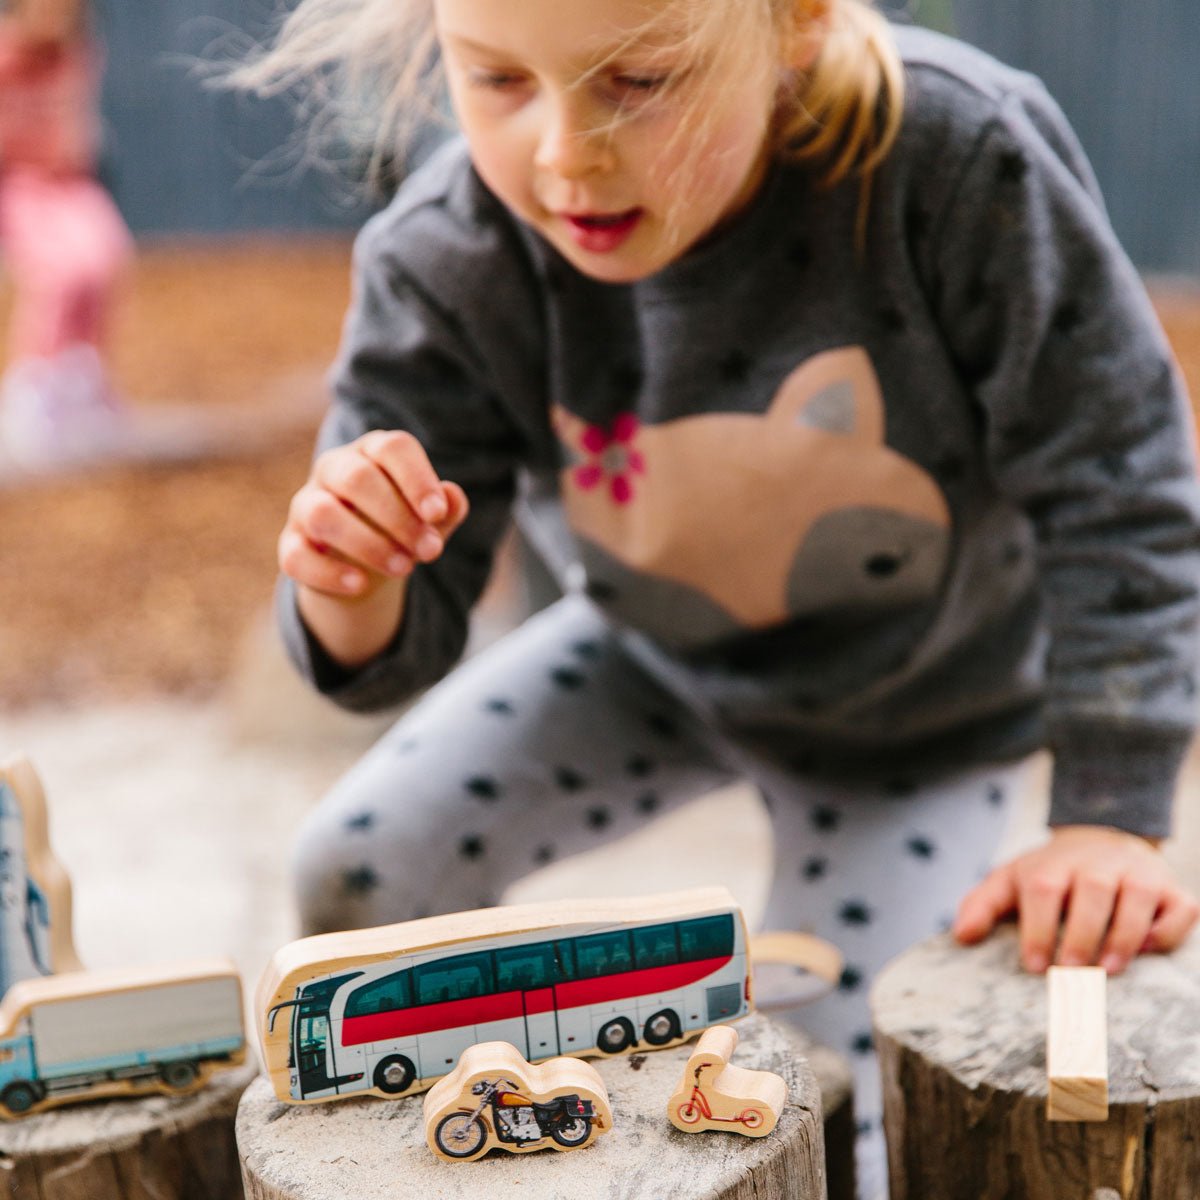 Getting Around Transport Wooden Blocks | Learning and Exploring Through Play